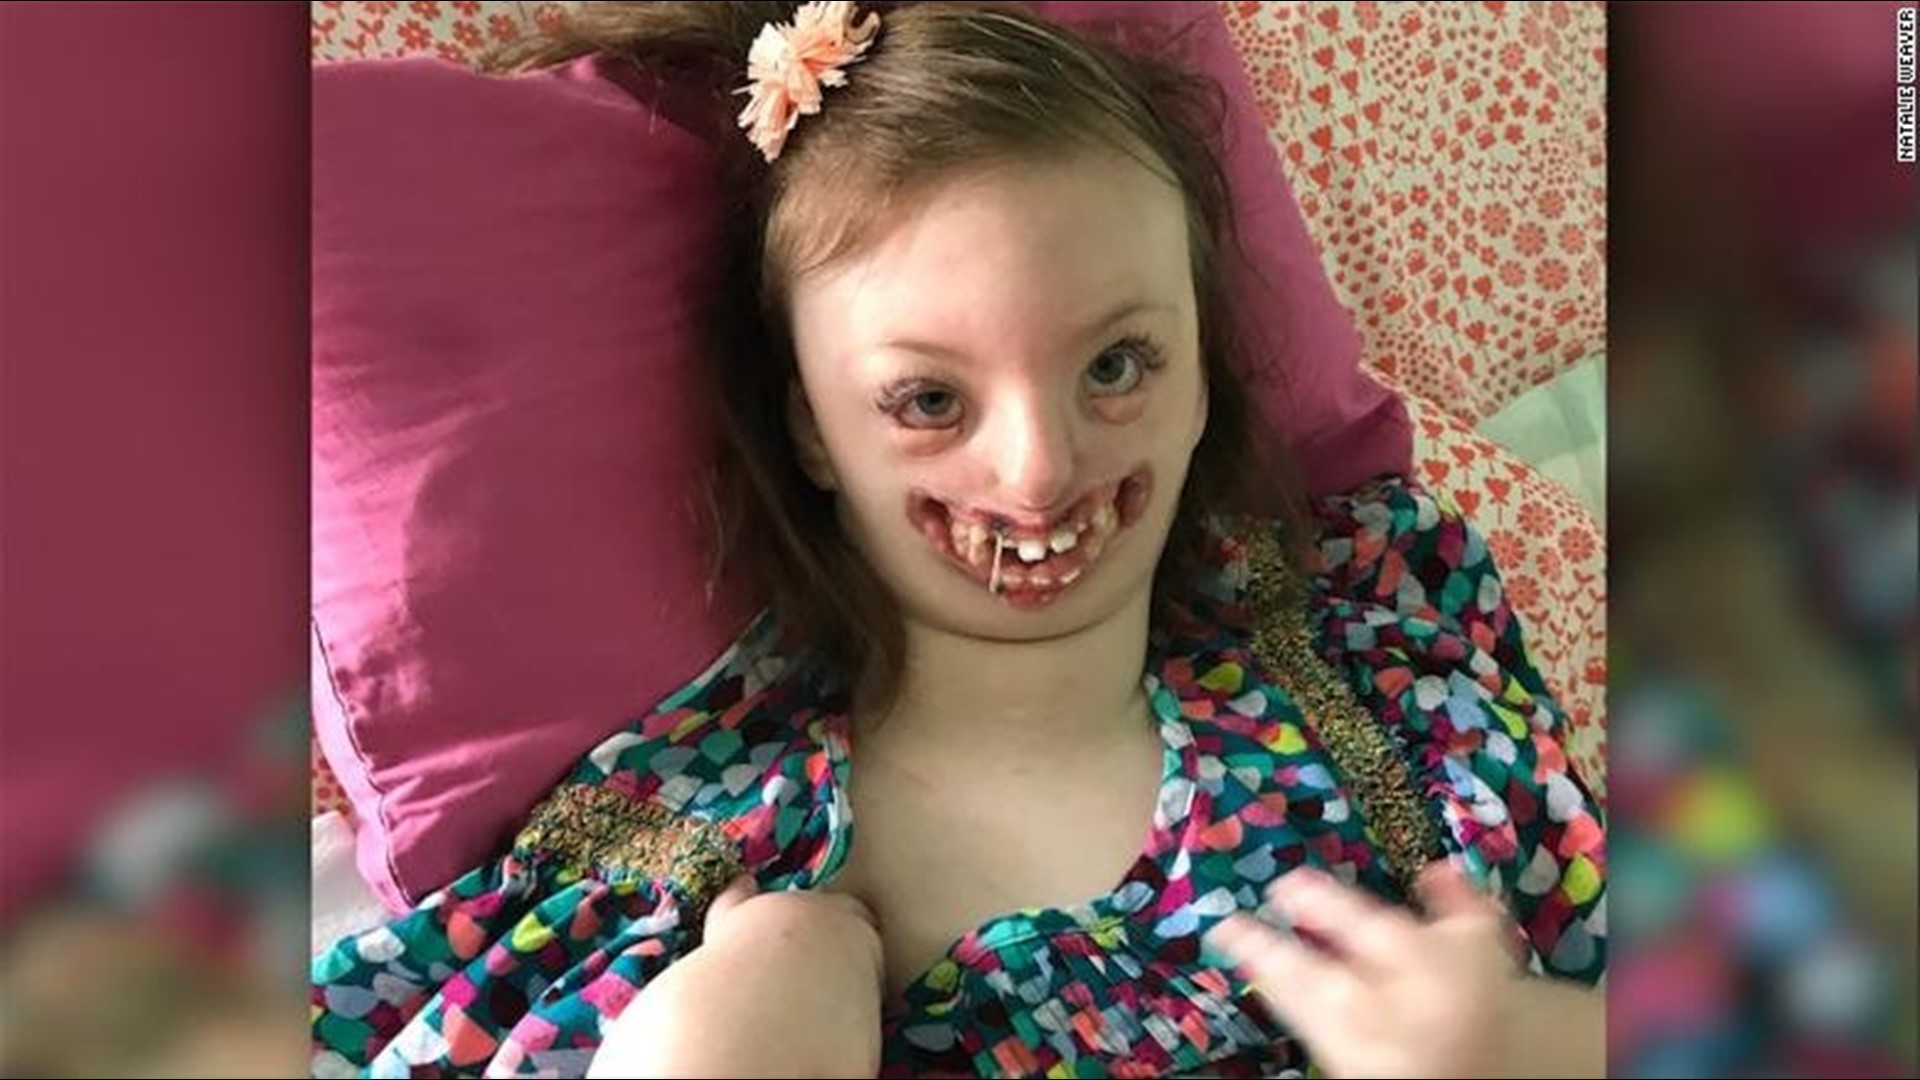 Mom Of Girl With Facial Deformity Fights Twitter Troll Who Used Her